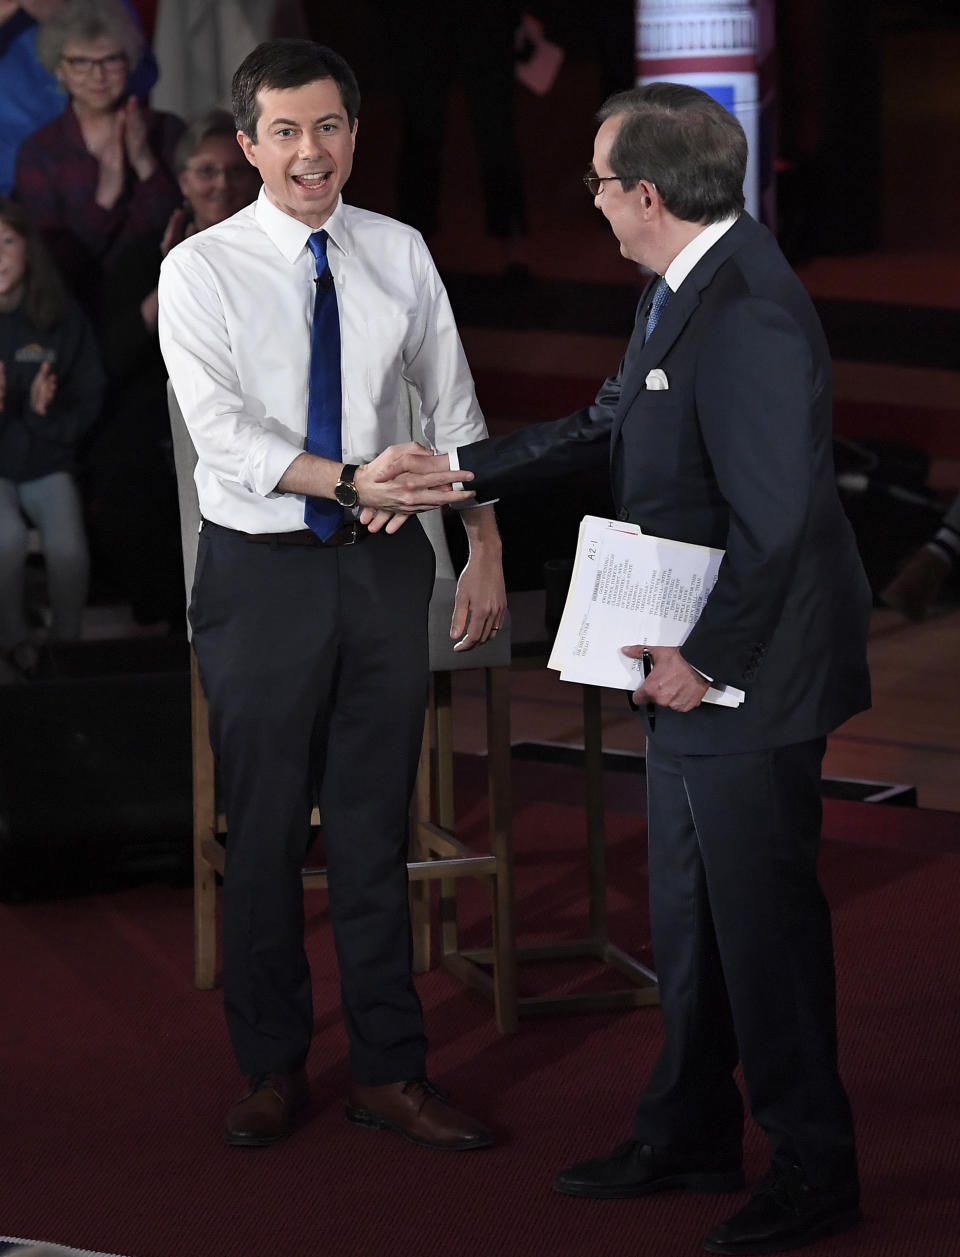 Democratic presidential candidate South Bend, Ind., Mayor Pete Buttigieg, left, shakes hands with moderator Chris Wallace as he is introduced during a FOX News Channel town hall, Sunday, May 19, 2019, in Claremont, N.H. (AP Photo/Jessica Hill)